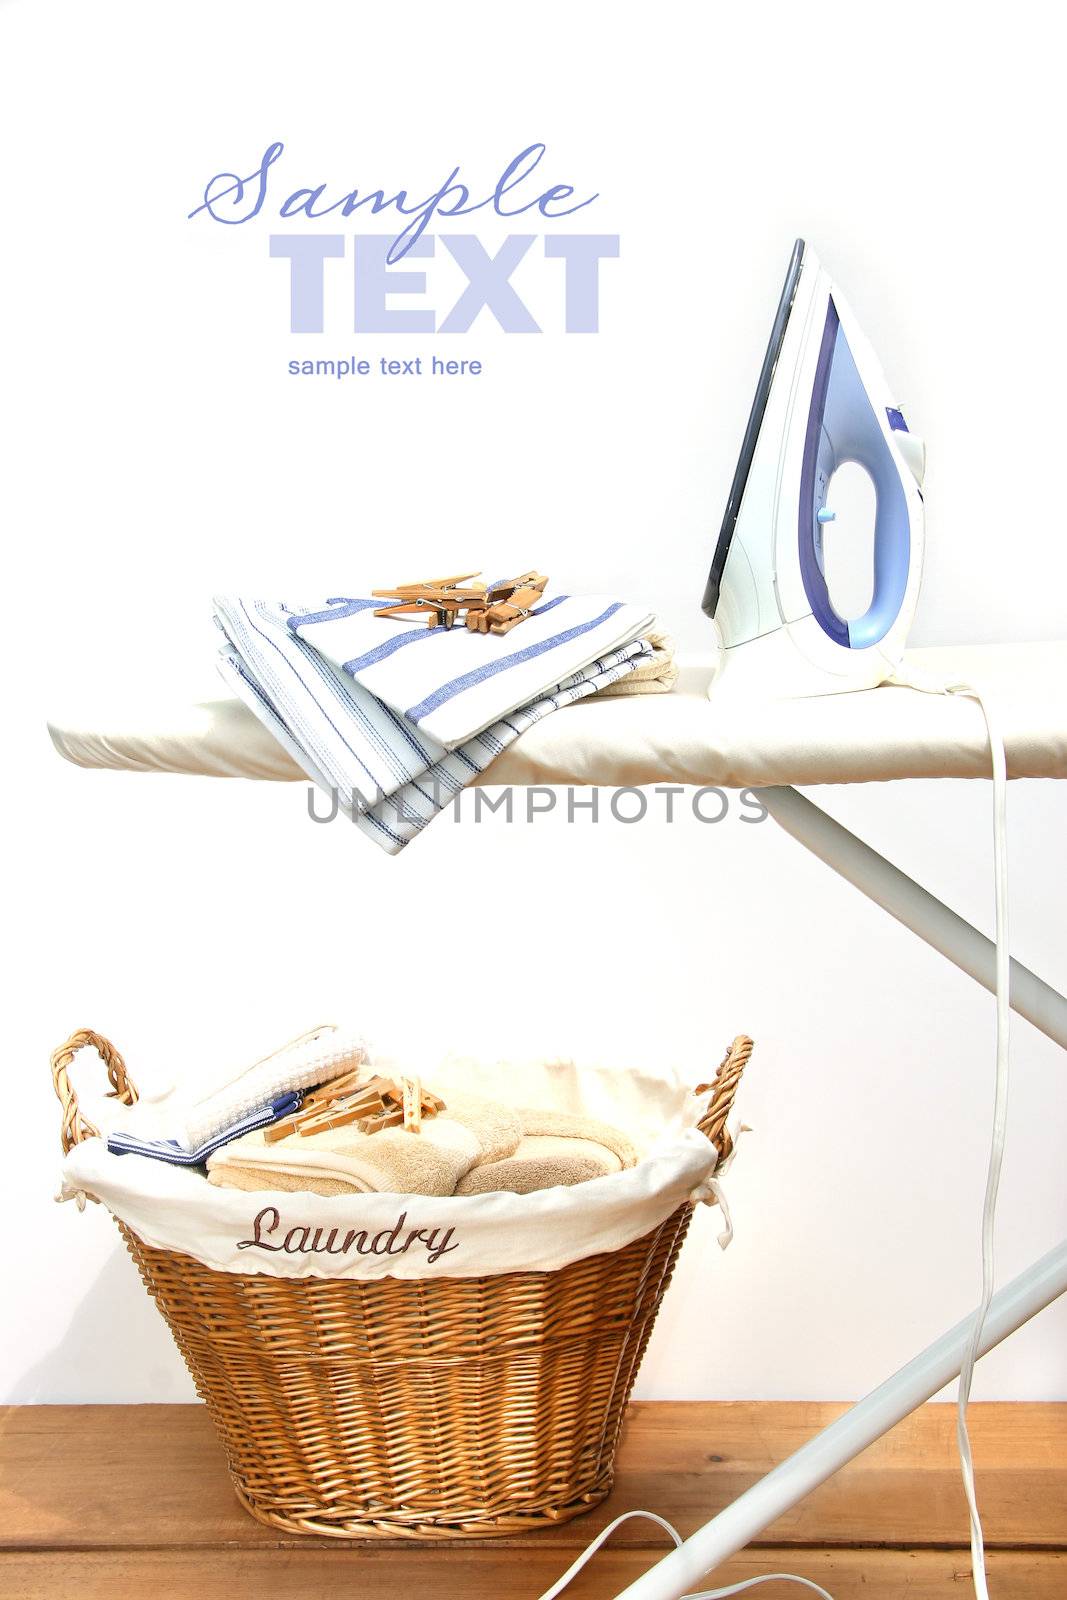 Ironing board with laundry  by Sandralise